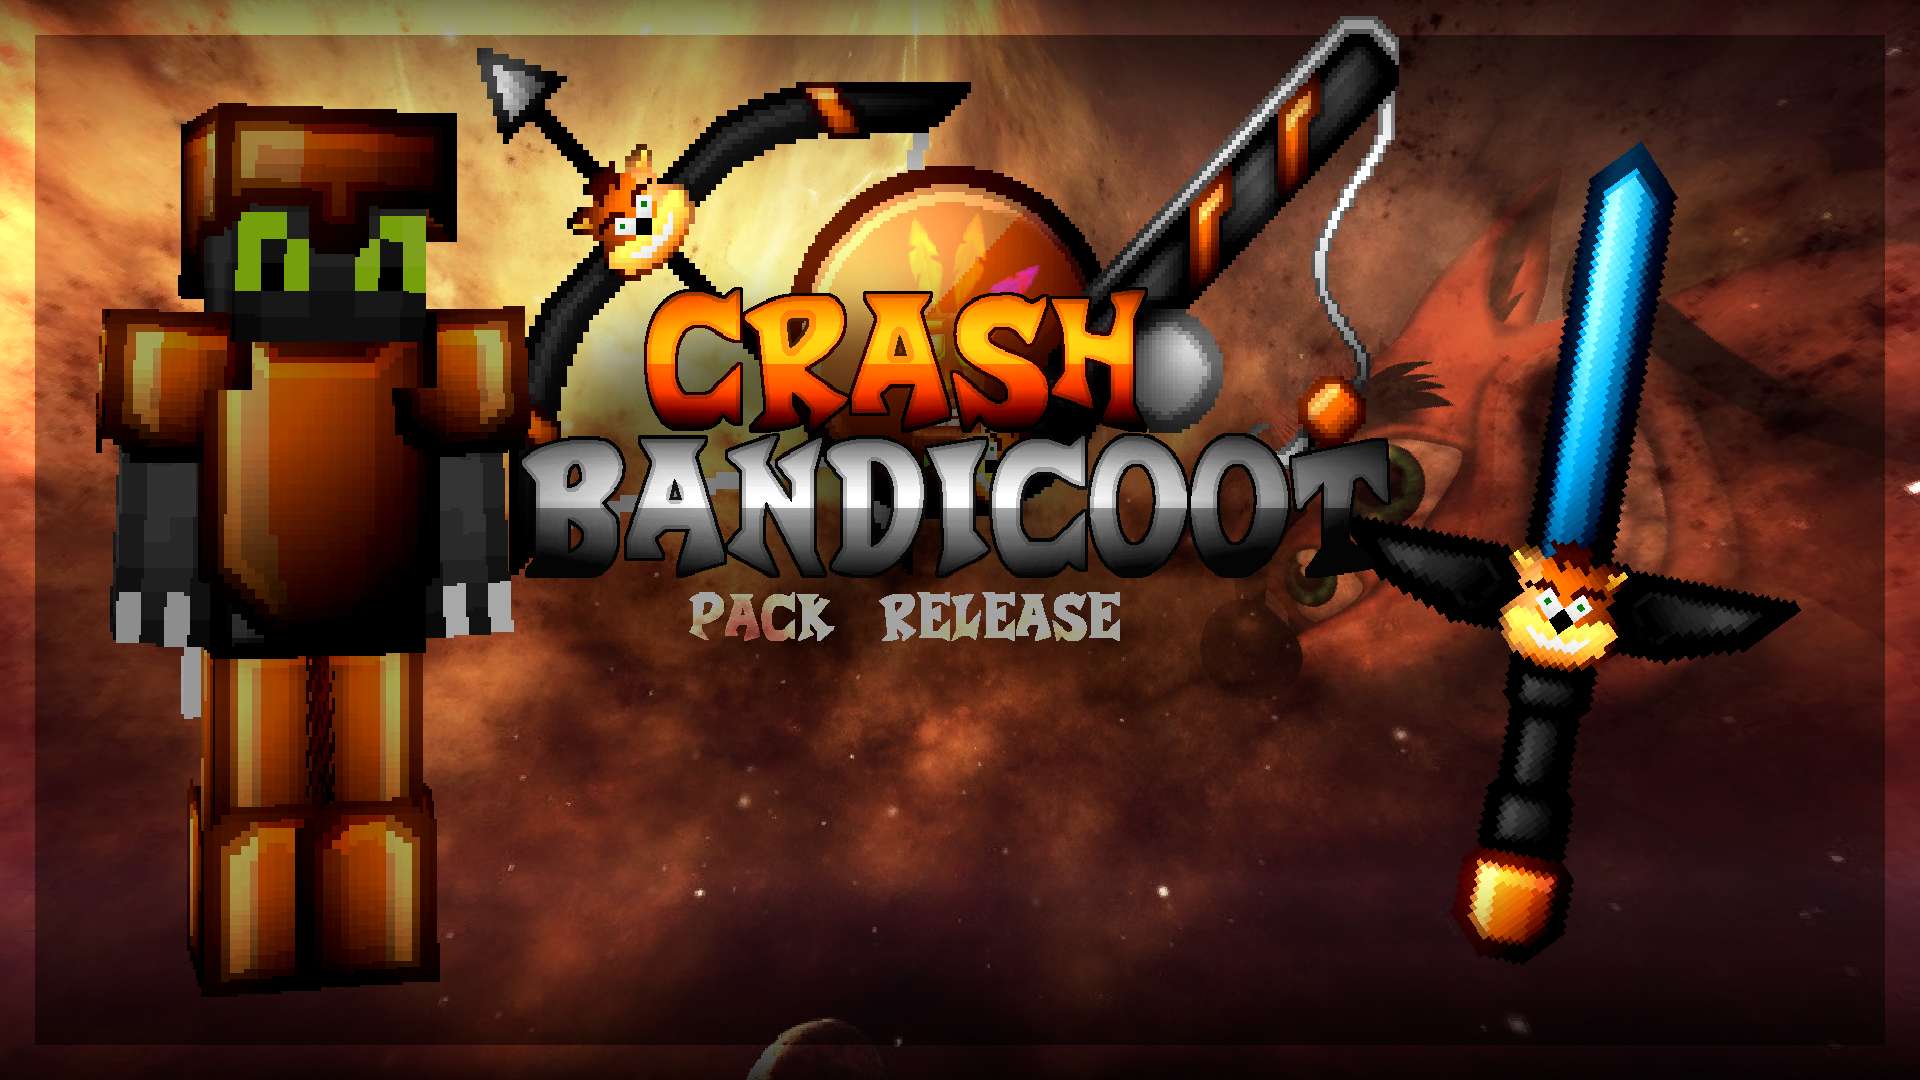 Gallery Banner for Crash Bandicoot on PvPRP